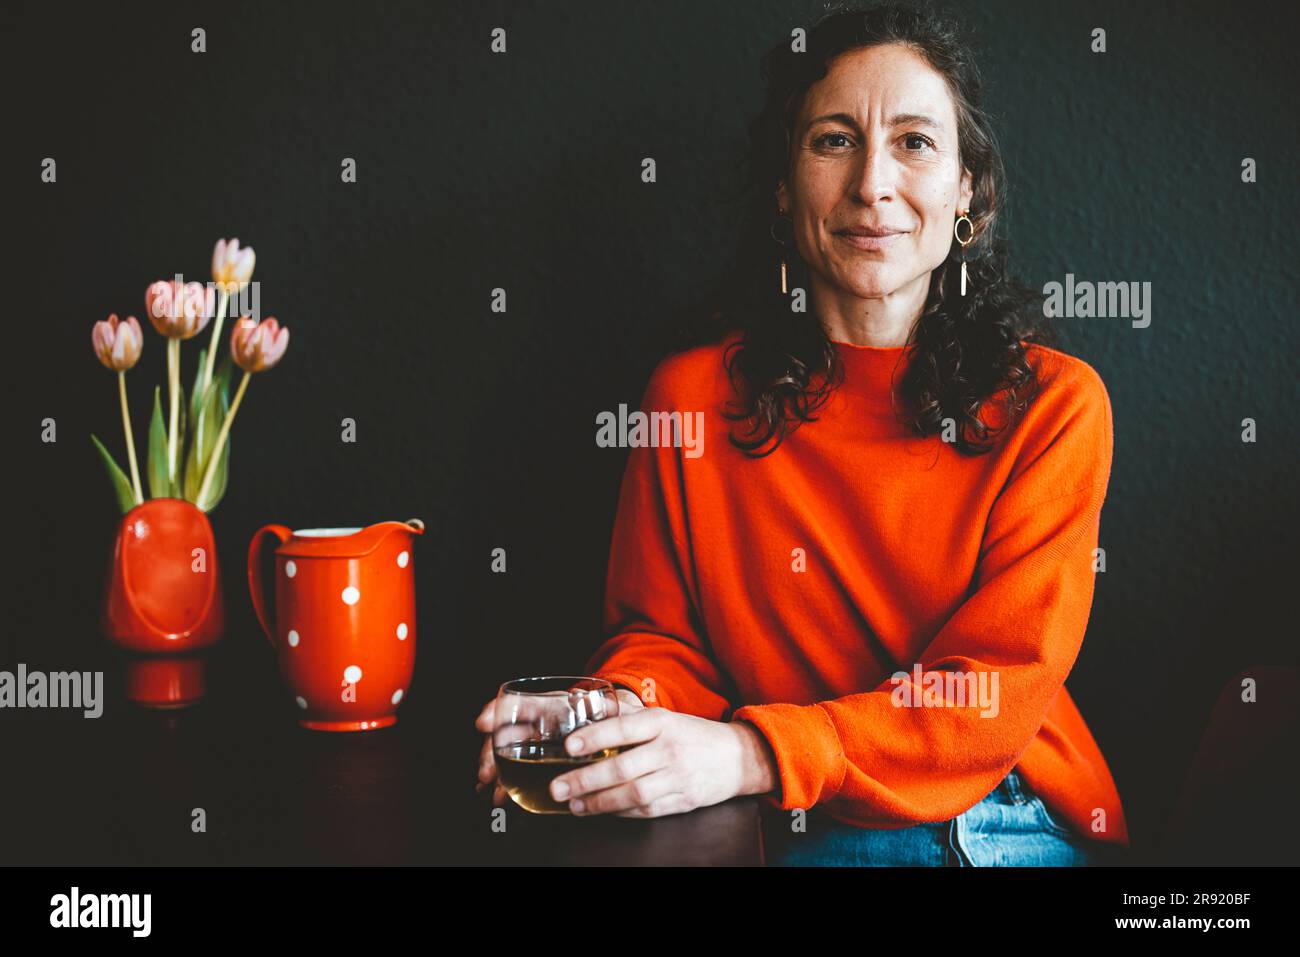 Smiling woman with drink sitting at table with red flower vase in front of black wall Stock Photo